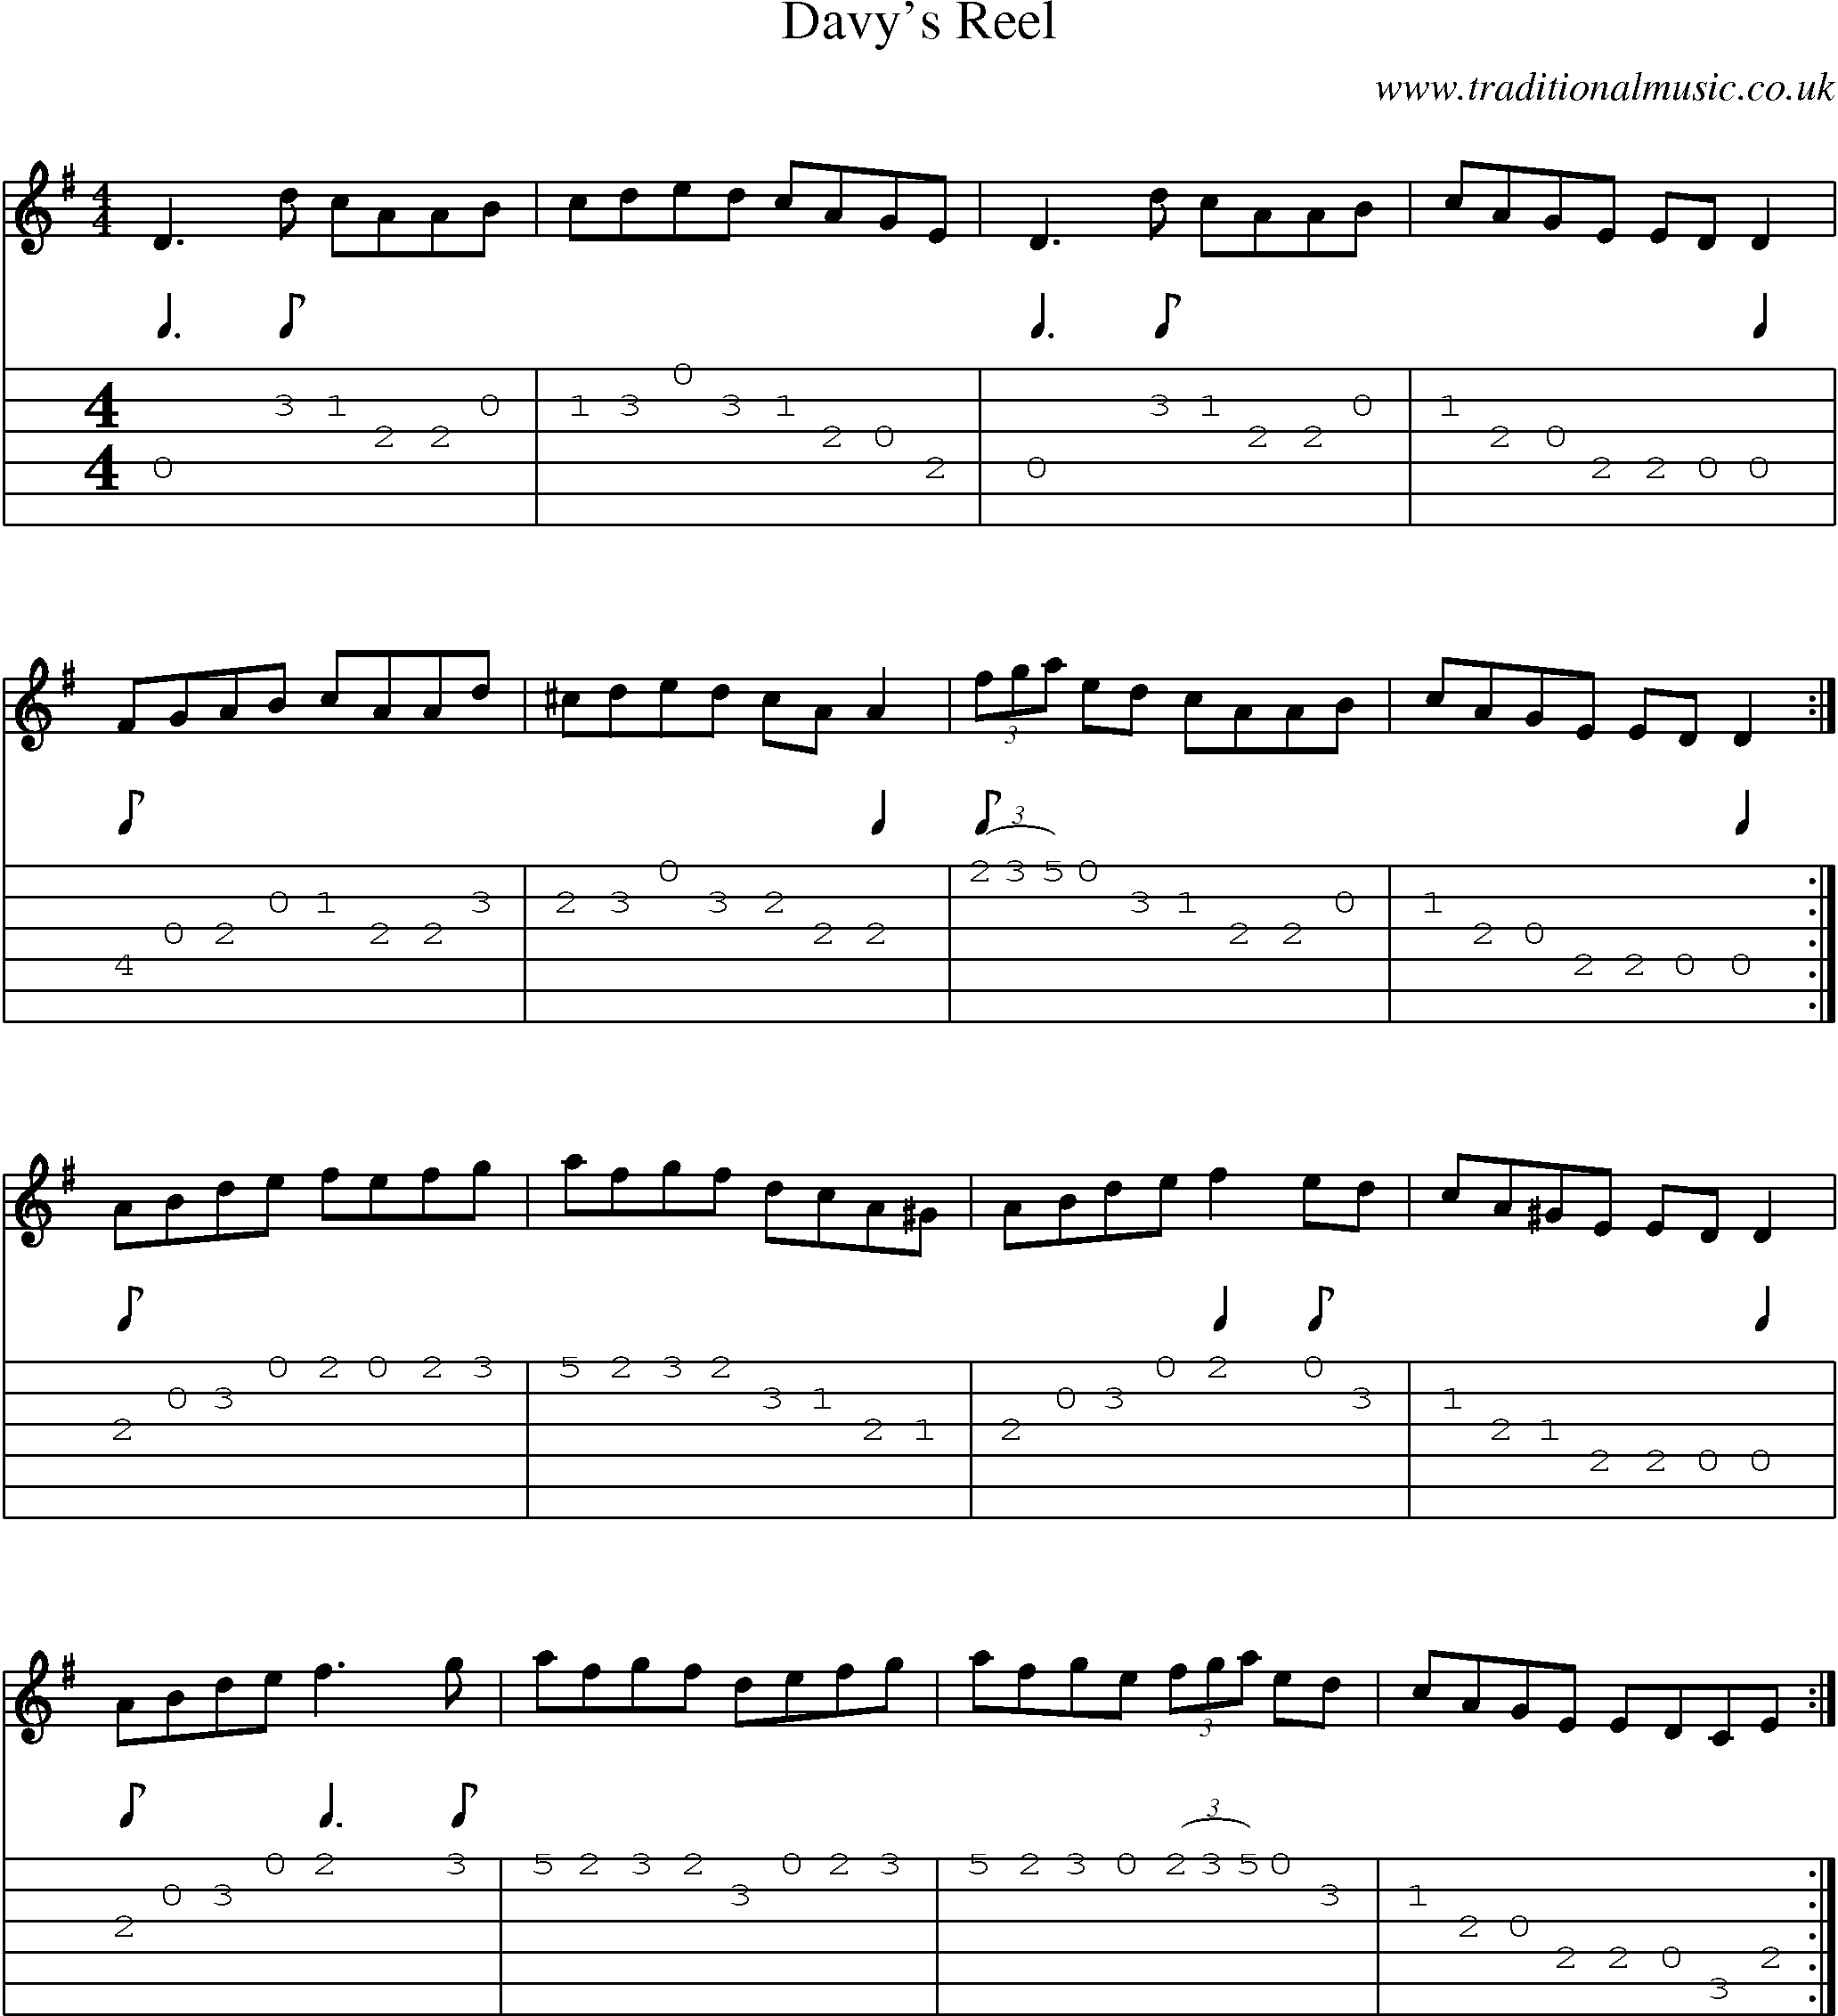 Music Score and Guitar Tabs for Davys Reel